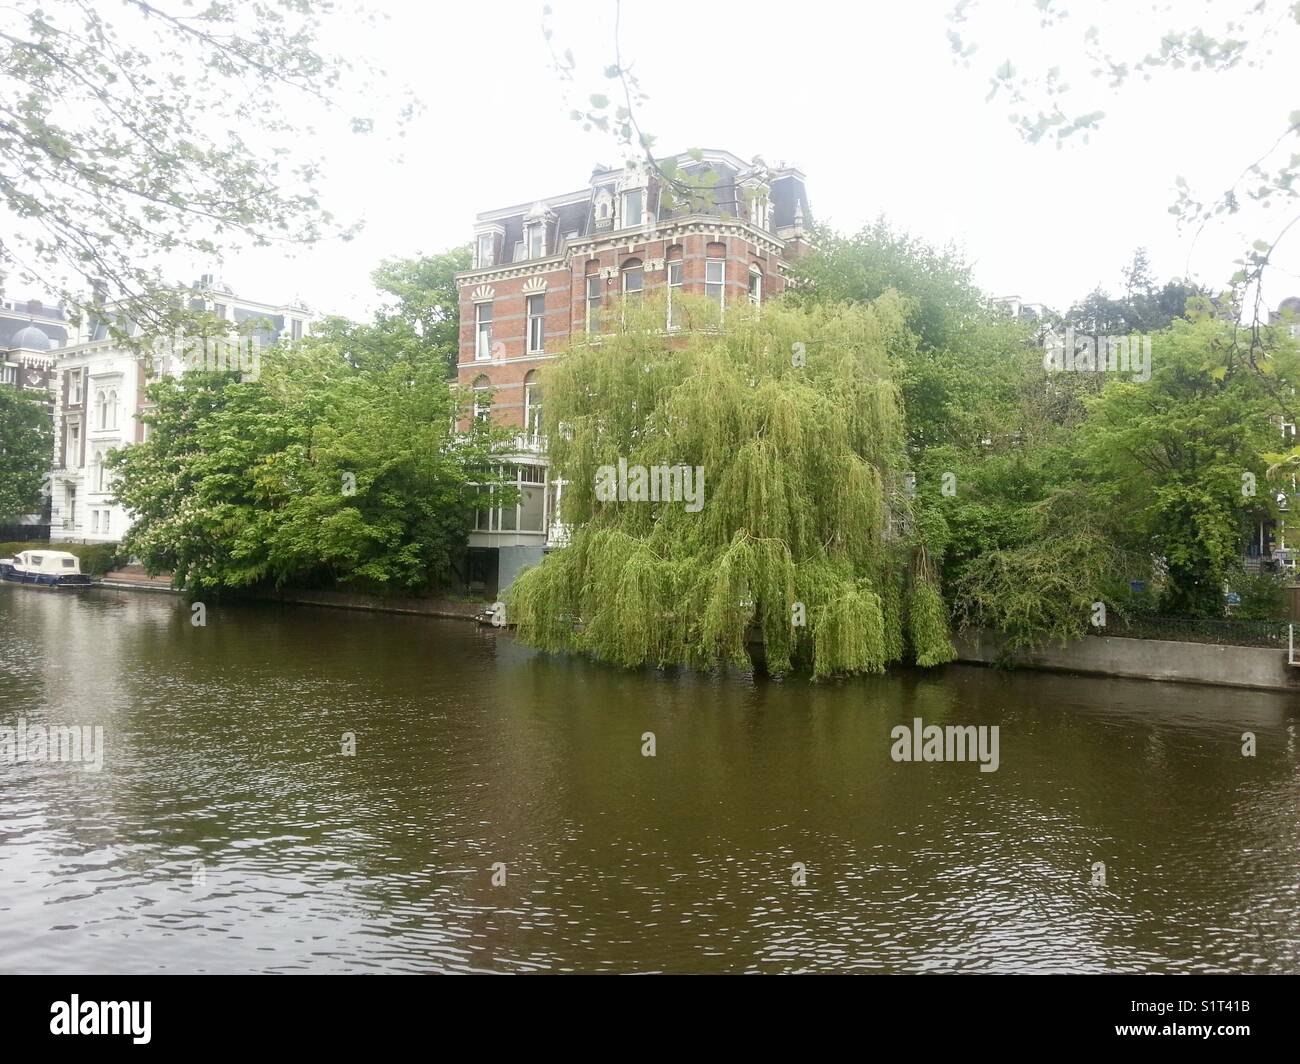 A beautiful willow tree near main channel in amsterdam Stock Photo